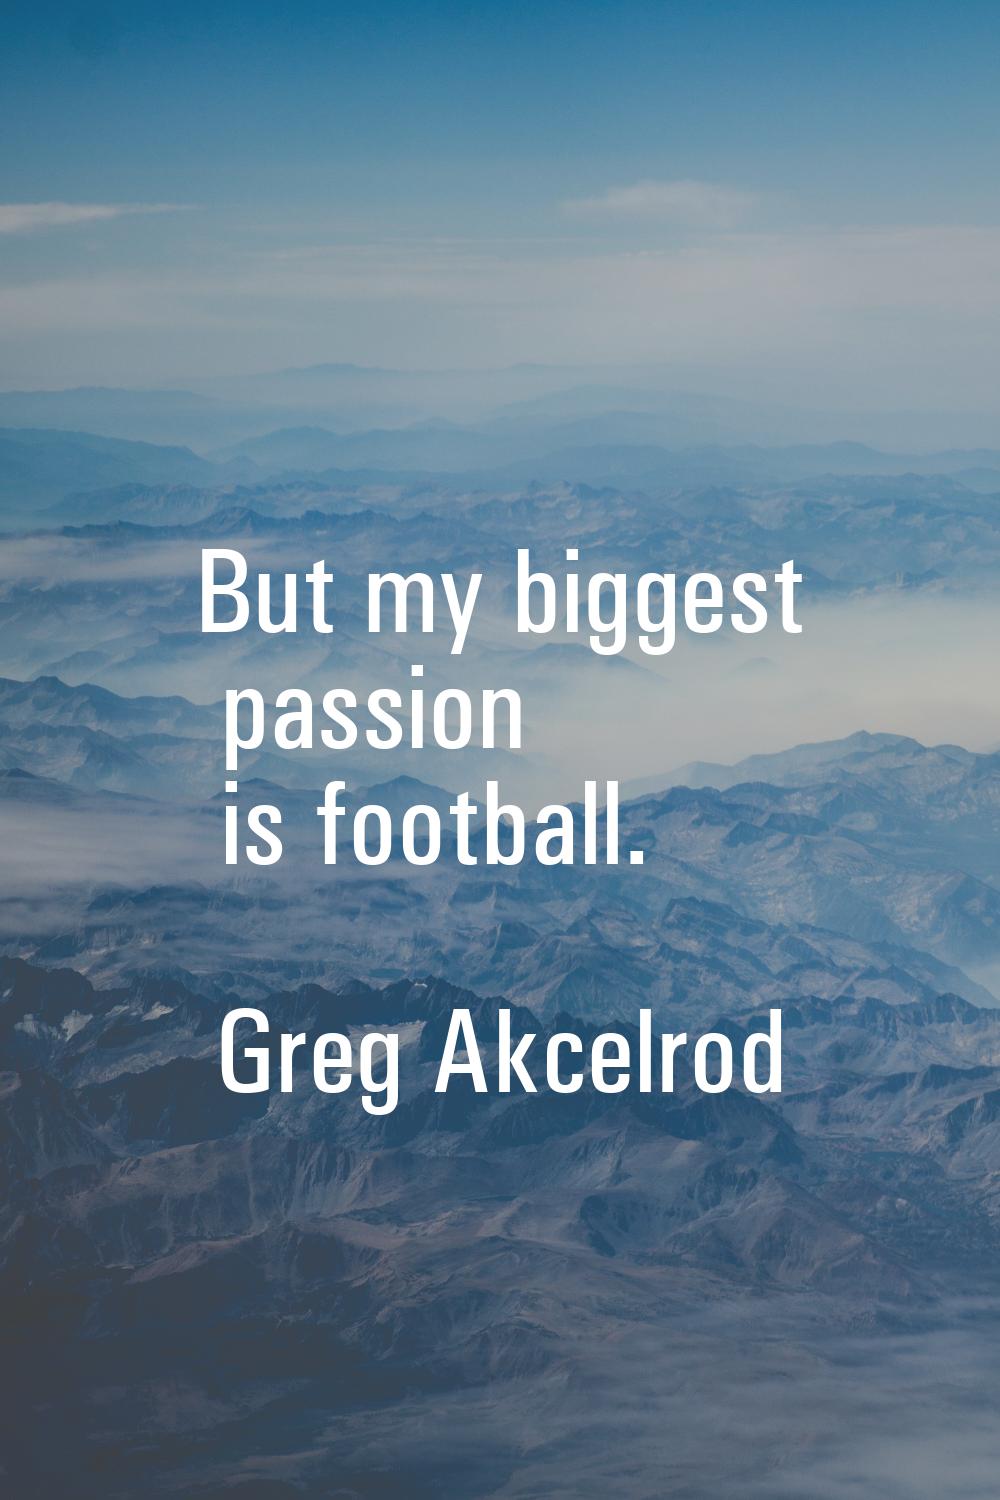 But my biggest passion is football.